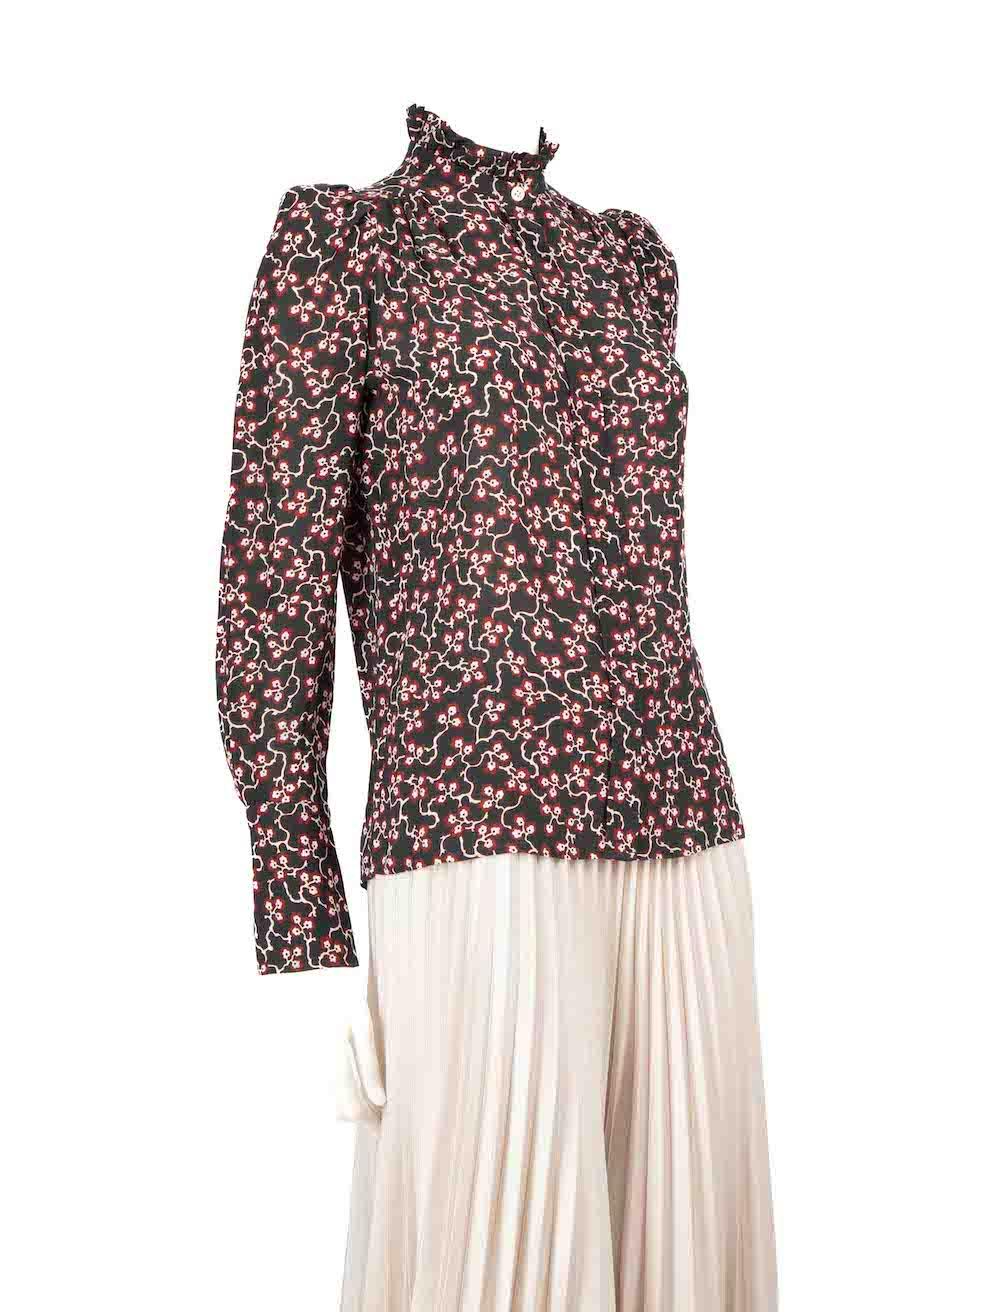 CONDITION is Very good. Hardly any visible wear to the blouse is evident on this used Isabel Marant designer resale item.
 
 
 
 Details
 
 
 Multicolour- black, white, burgundy
 
 Silk
 
 Blouse
 
 Floral pattern
 
 Ruffle trim
 
 Button up